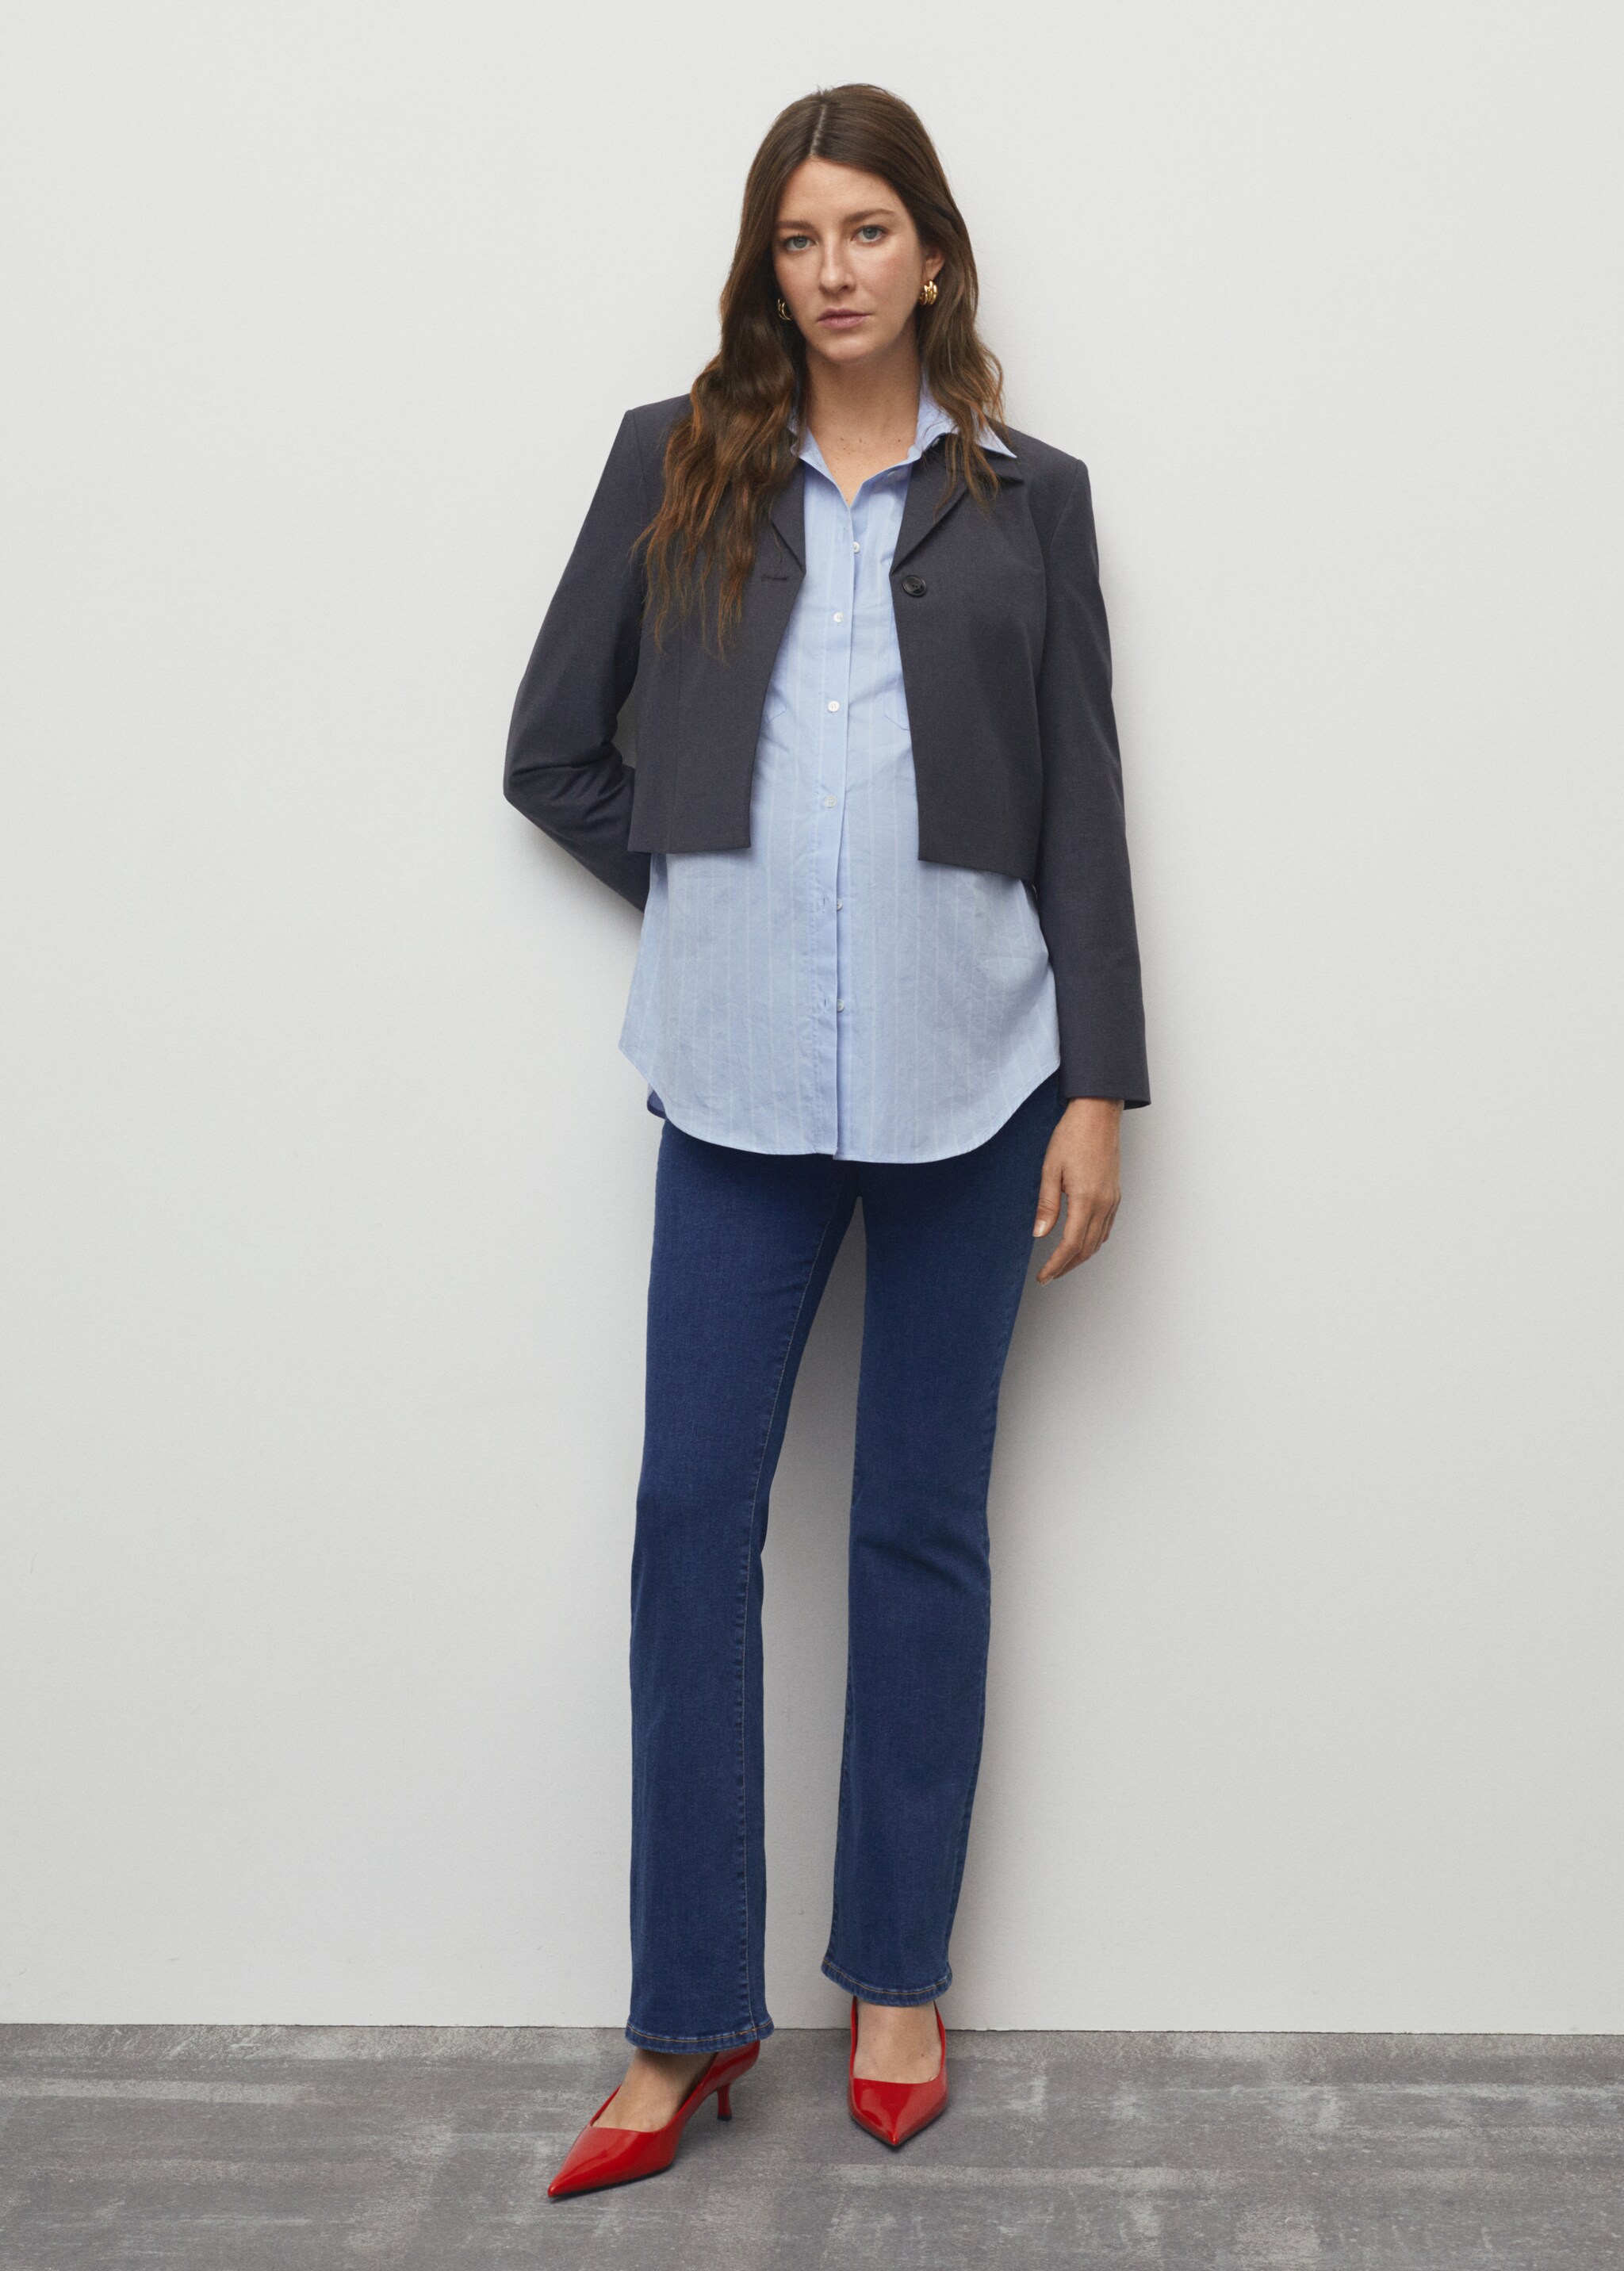 Maternity flared jeans - General plane